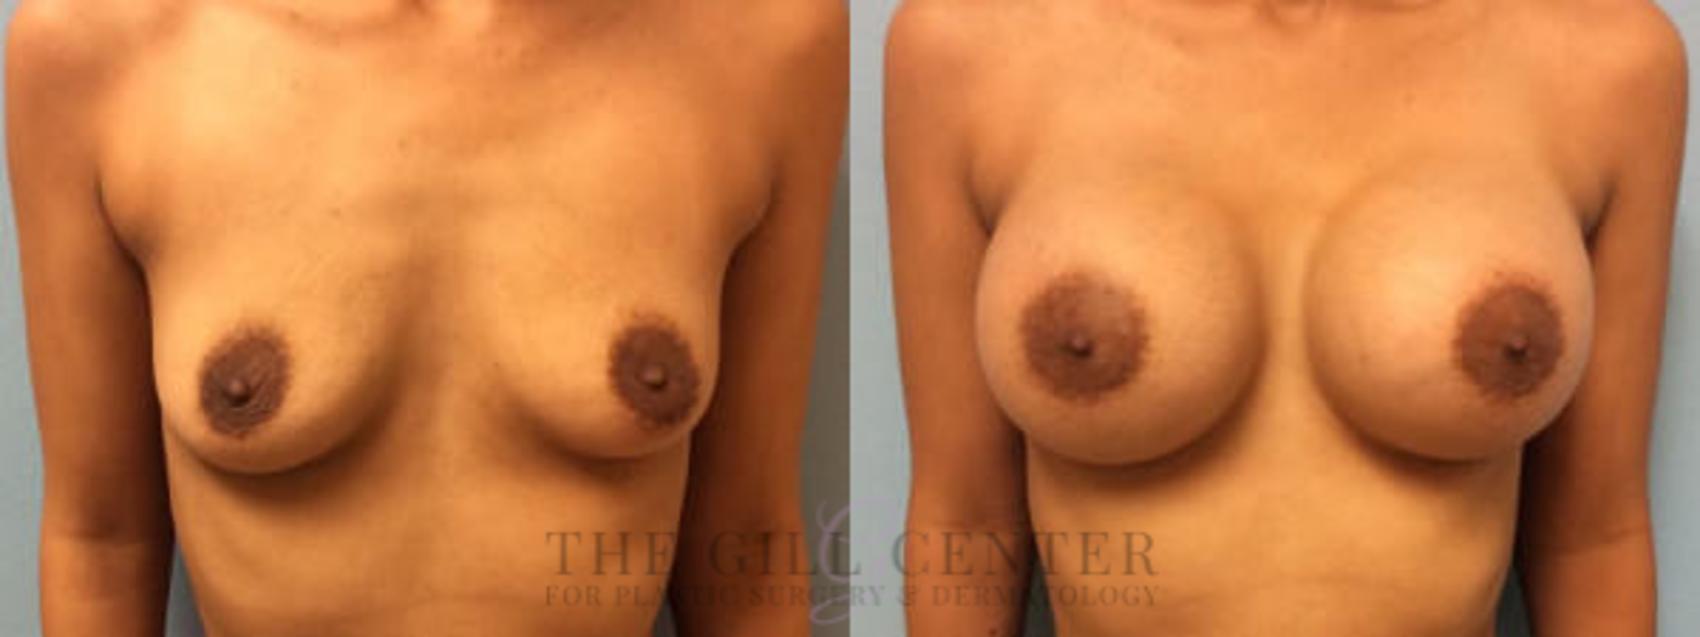 Breast Augmentation Case 35 Before & After Front | The Woodlands, TX | The Gill Center for Plastic Surgery and Dermatology